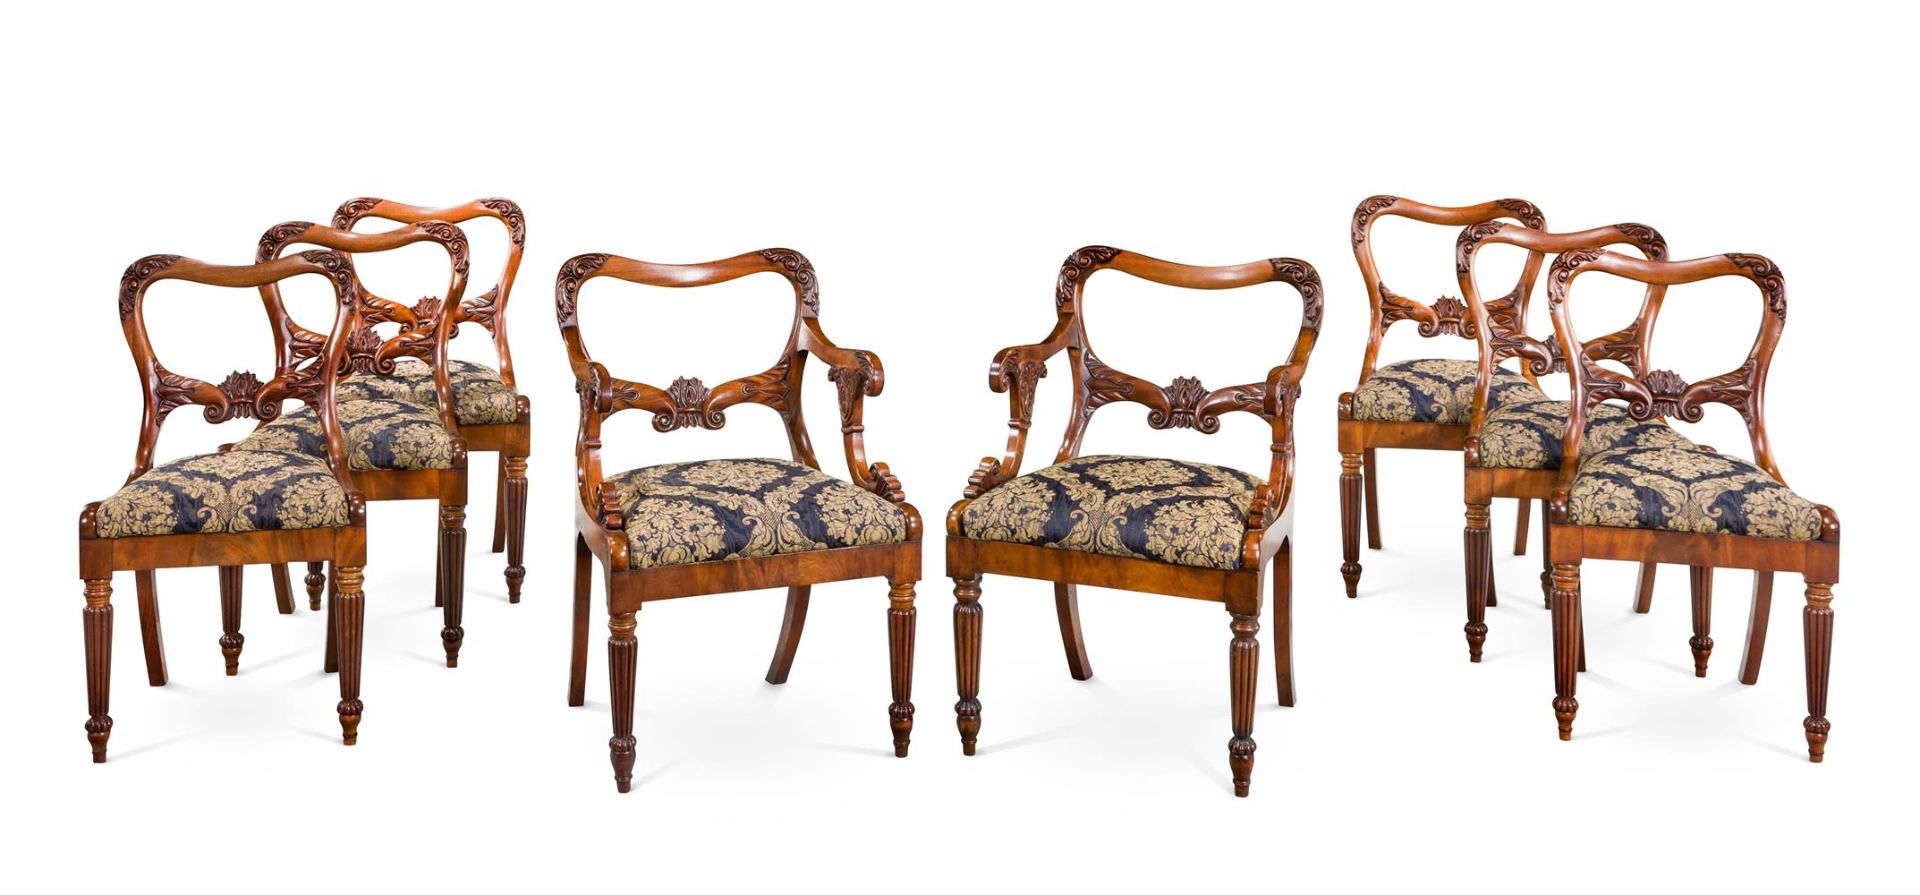 A SET OF EIGHT GEORGE IV CARVED MAHOGANY DINING CHAIRS ATTRIBUTED TO GILLOWS, CIRCA 1825